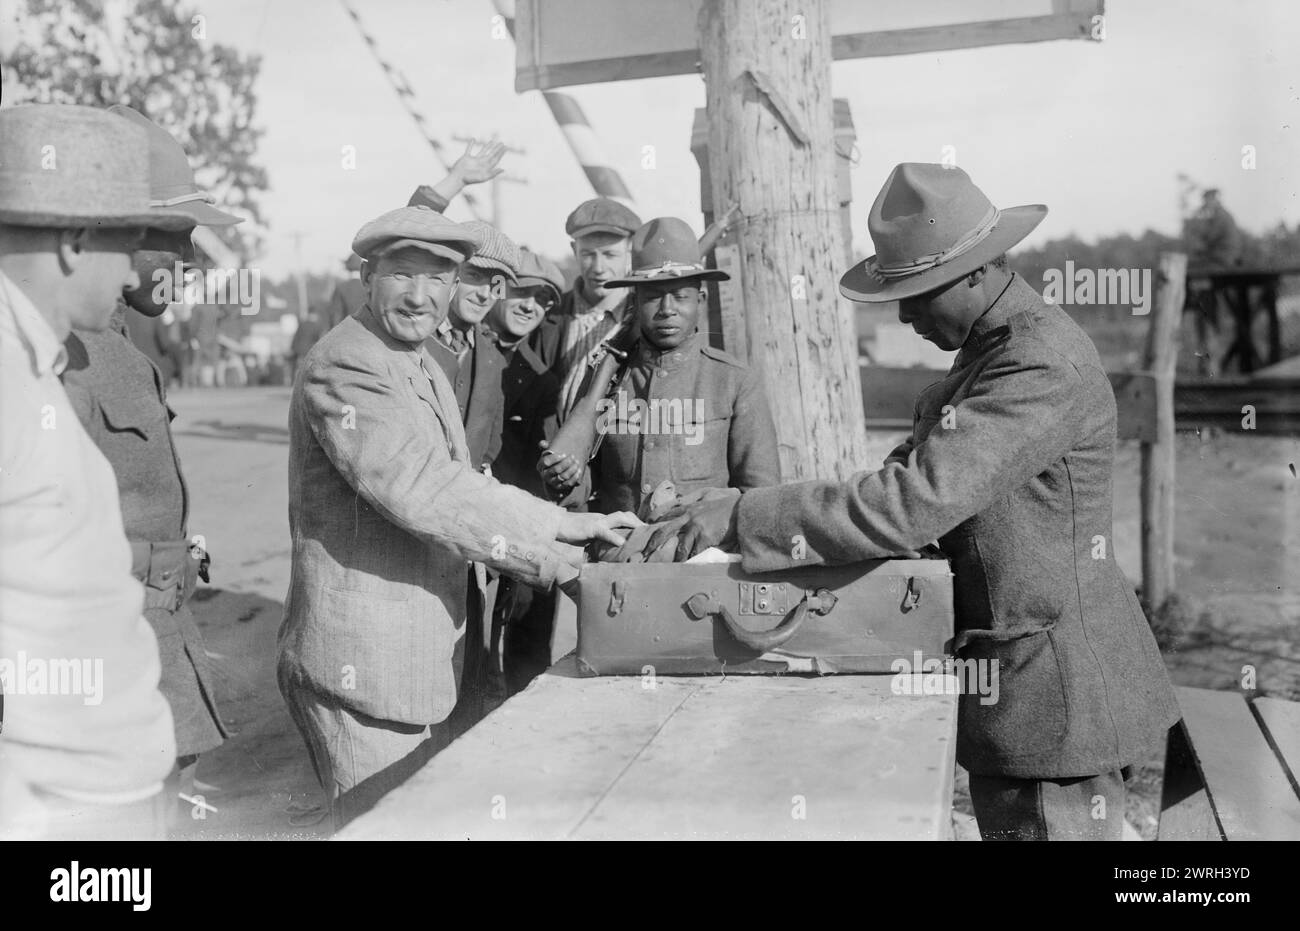 Examining pkges, Camp Upton, Sept 1917. African American soldiers looking at packages at Camp Upton, a U.S. Army installation located on Long Island, in Yaphank, New York, during World War I. Stock Photo